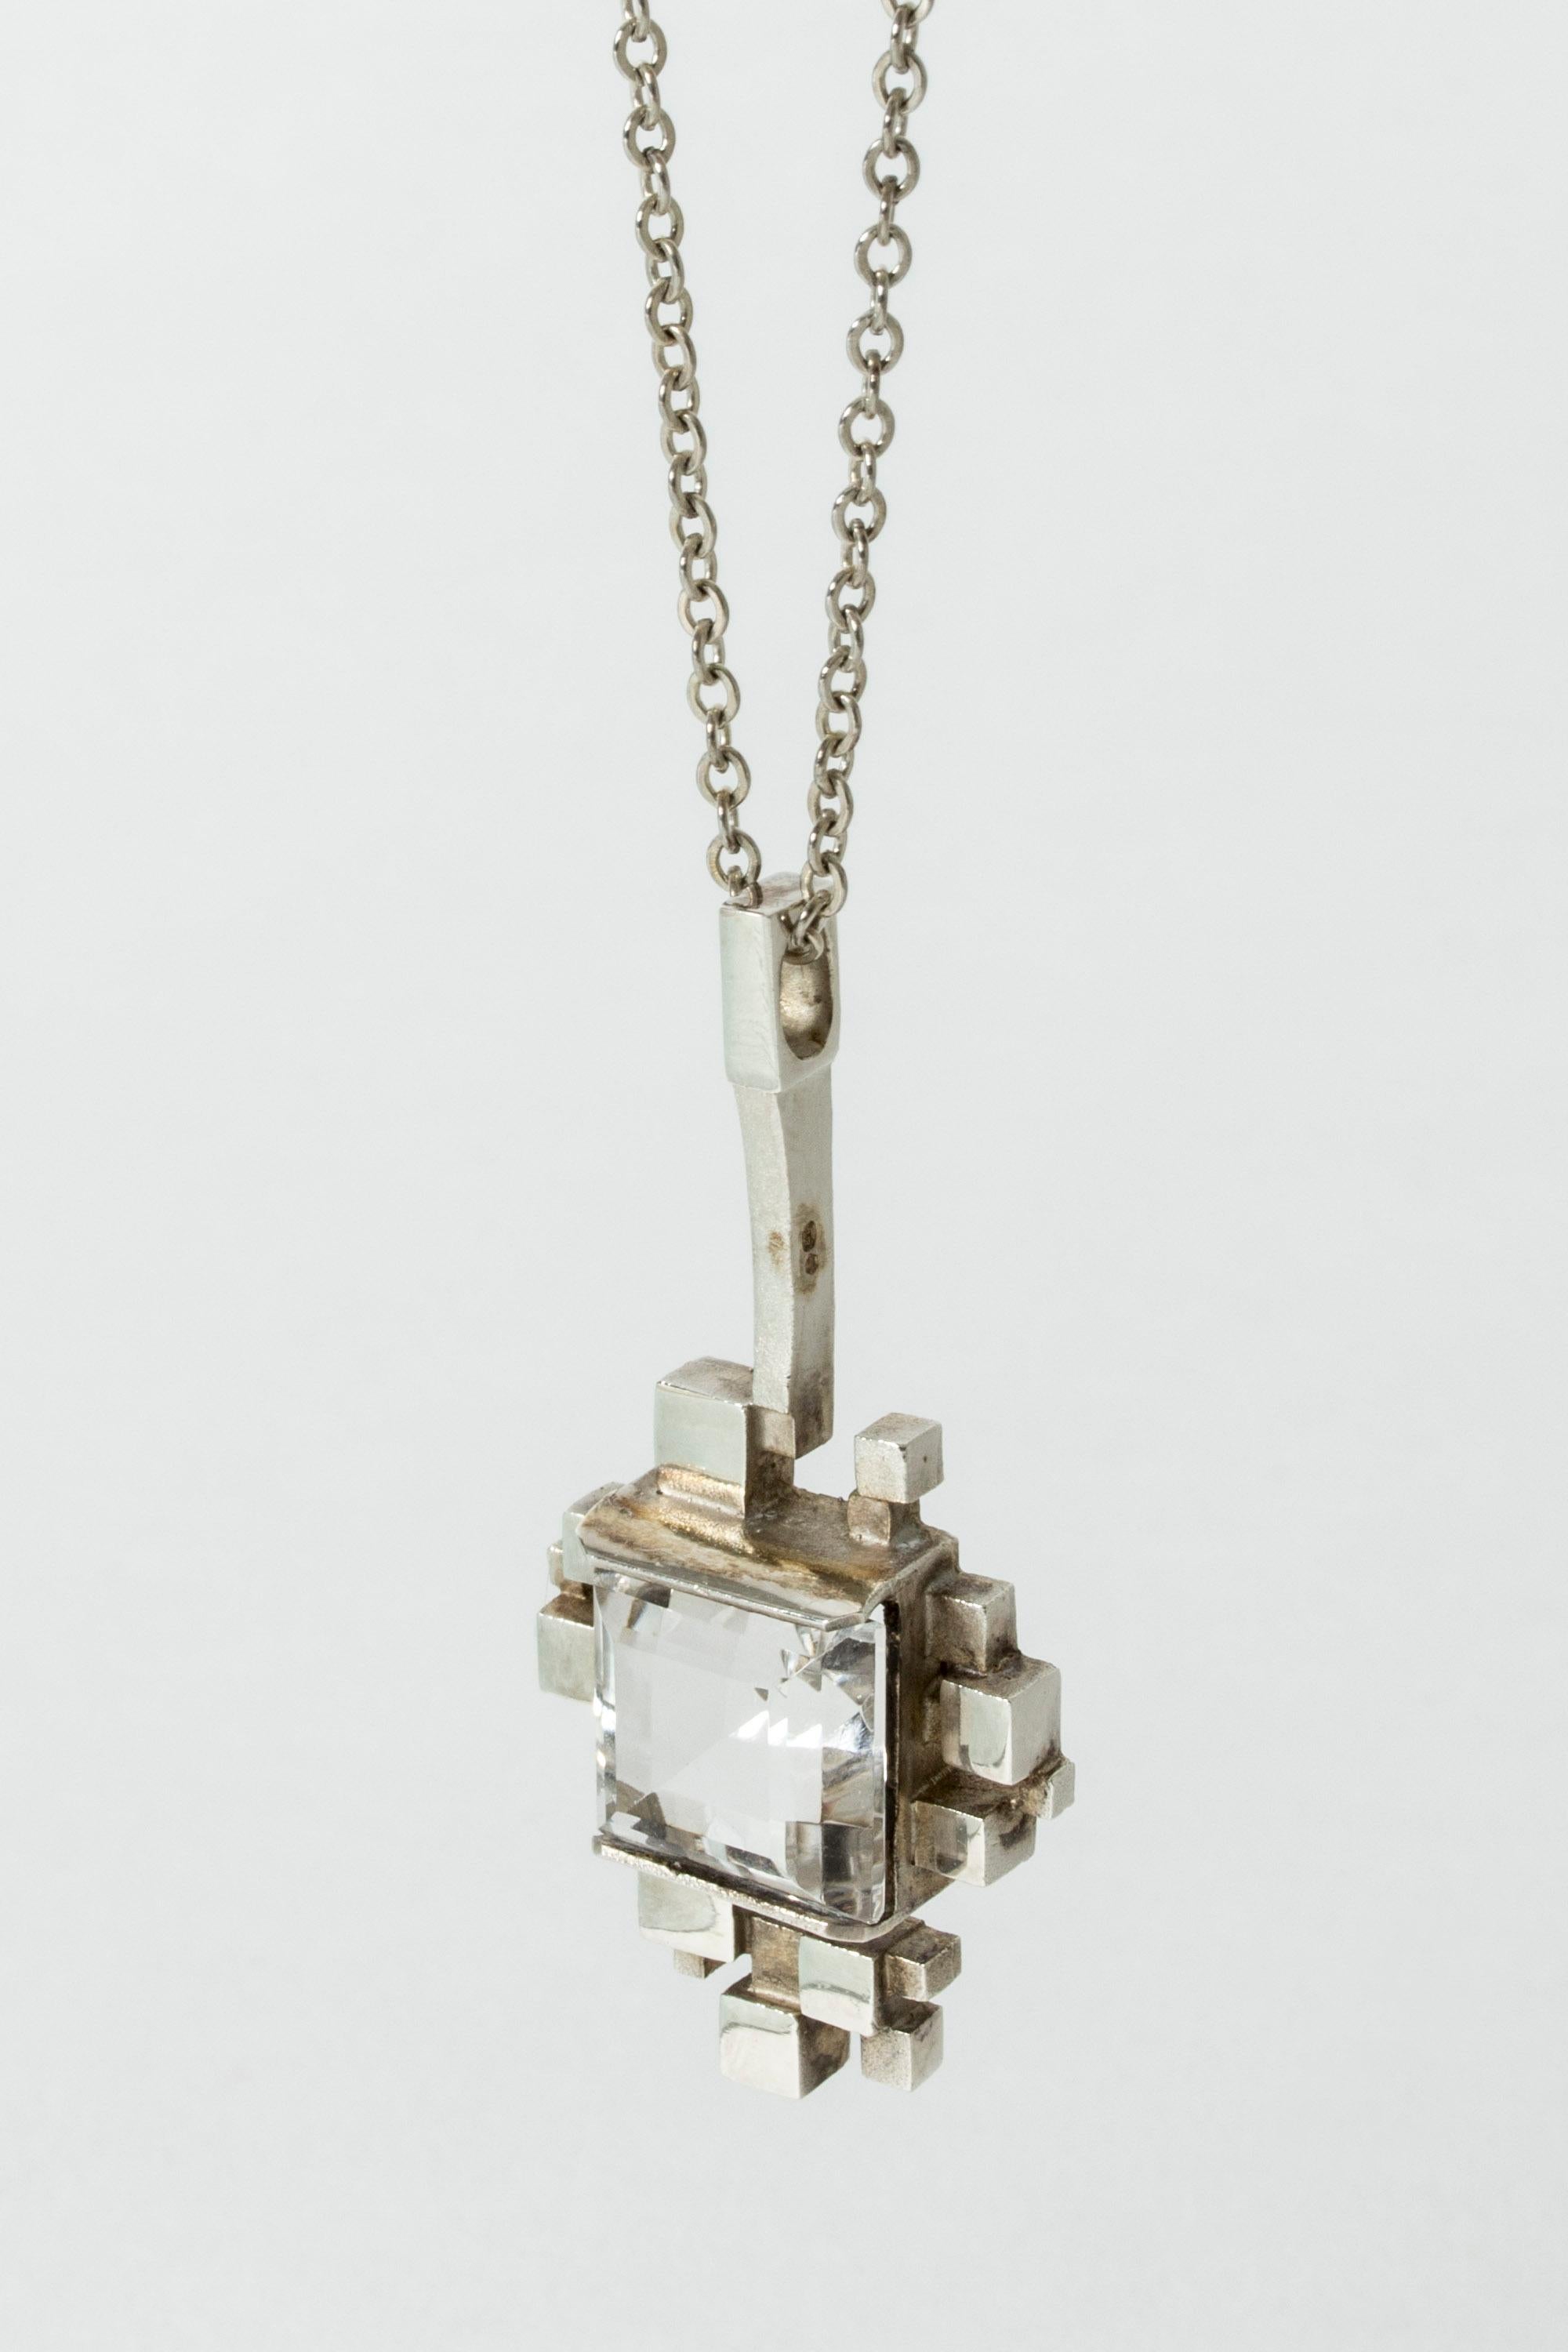 Beautiful silver pendant by Jorma Laine, with a square rock crystal in an asymmetric frame of silver cubes. A wonderful design, eye-catching design.

Height 5.4, width 2.5, depth 1 cm (pendant), length 48 cm (chain)